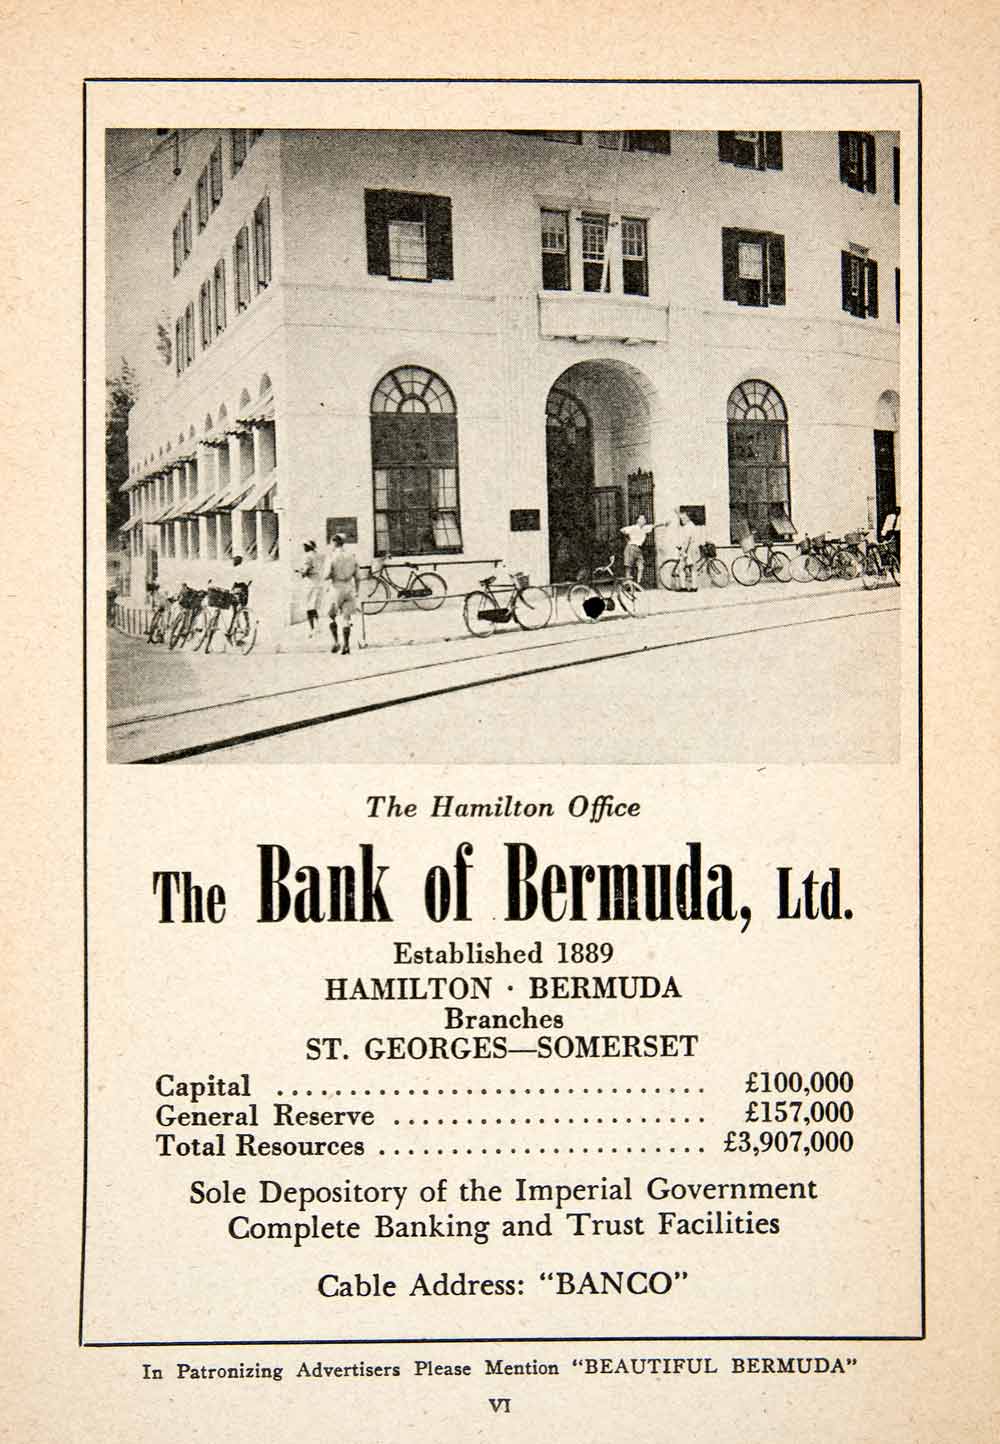 1947 Ad Hamilton Bermuda Bank St. Georges Somerset Office Building Banking XGZA6